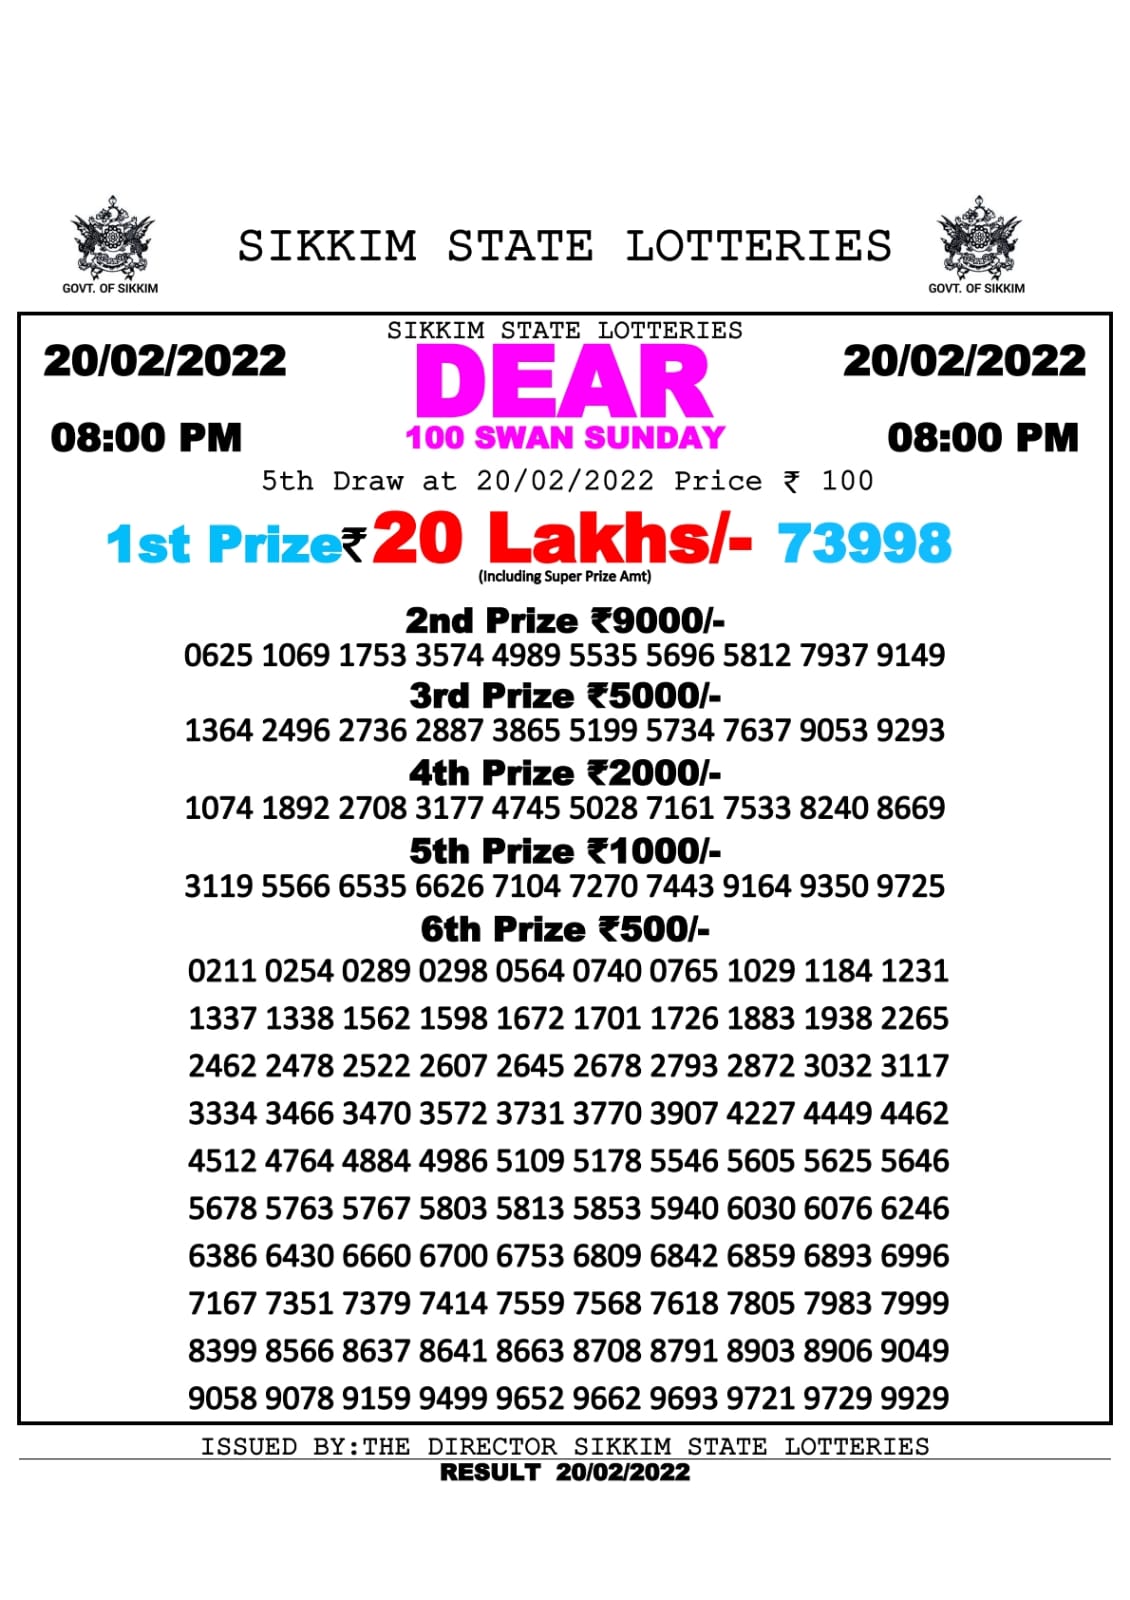 DEAR 100 WEEKLY RESULT 8.00PM 20.02.2022